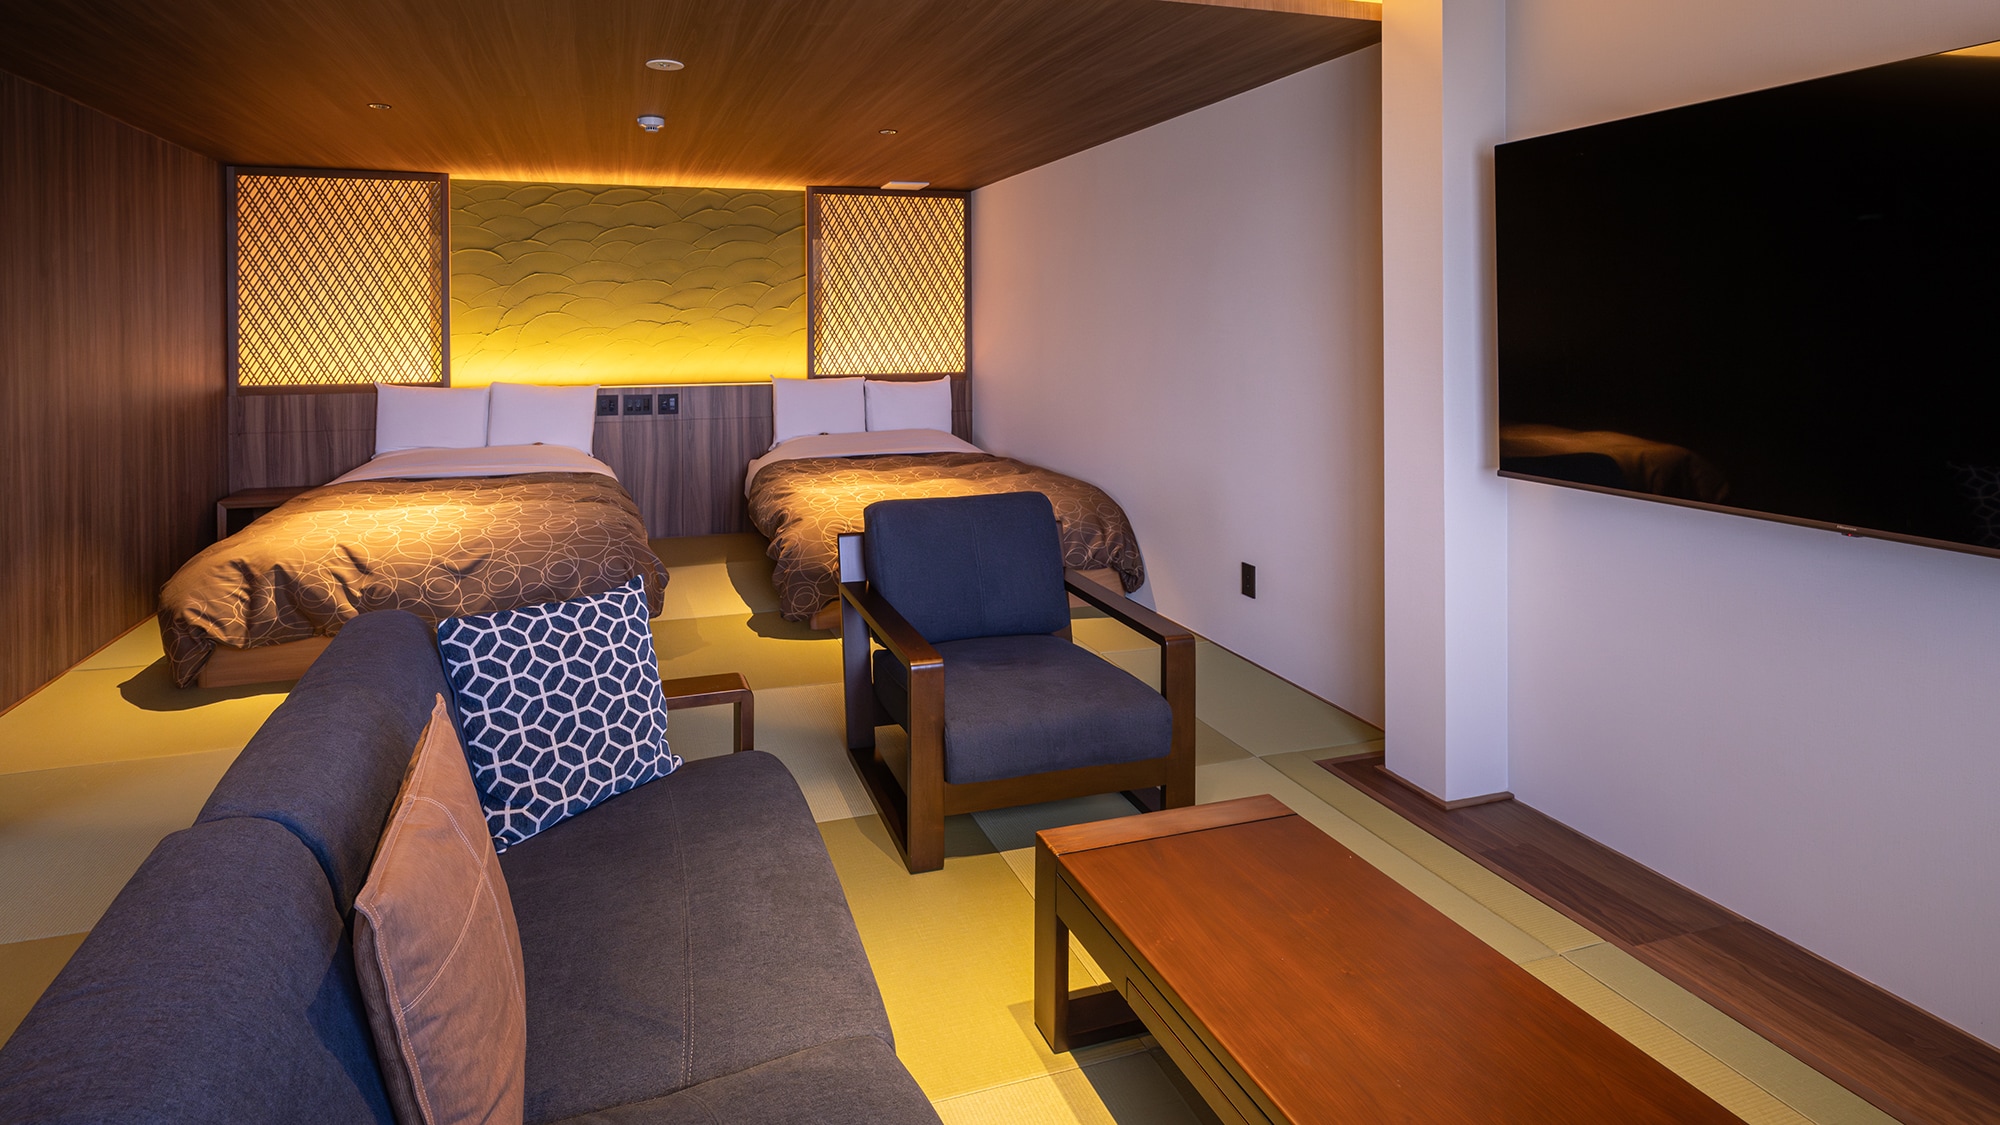 A 56 square meter Japanese-Western style room, ideal for family vacations. Beds and futons can accommodate a large number of people.